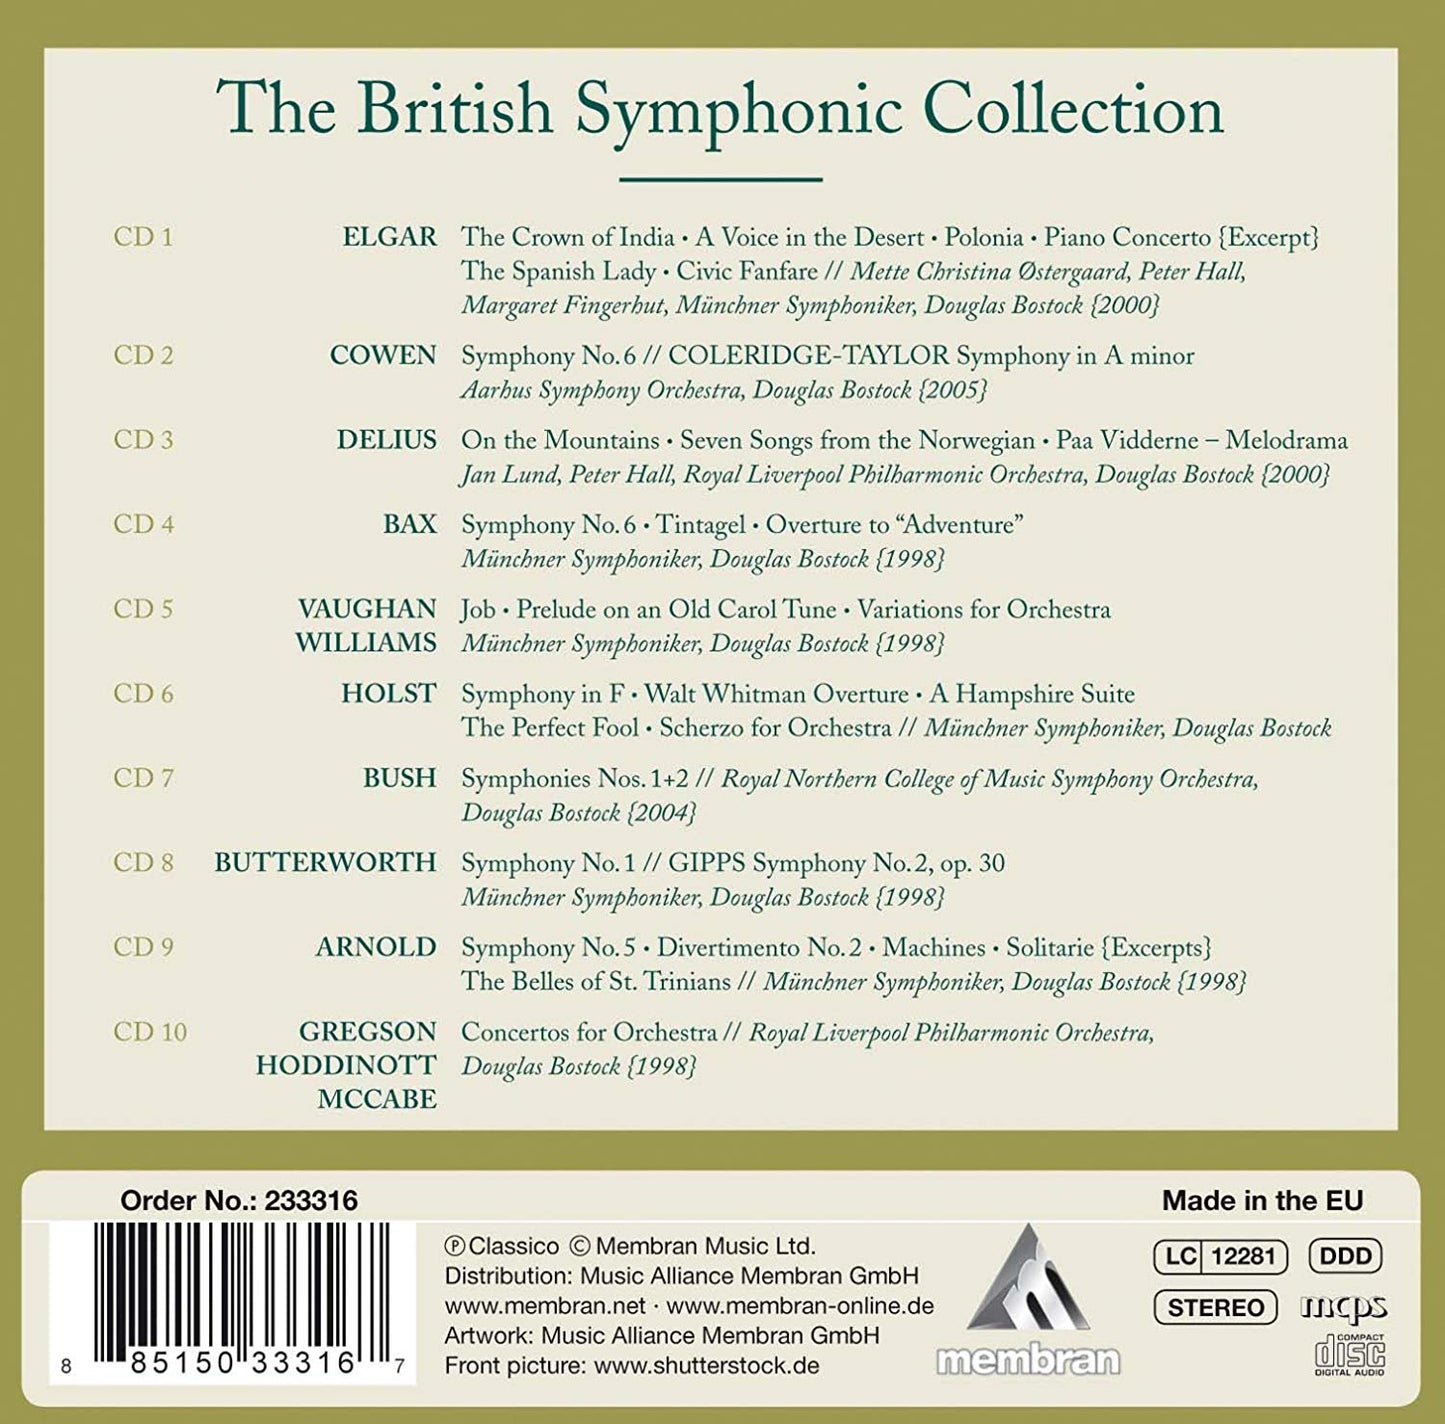 THE BRITISH SYMPHONIC COLLECTION (BAX, ELGAR, VAUGHAN WILLIAMS, DELIUS AND MORE) - BOSTOCK (10 CDS)